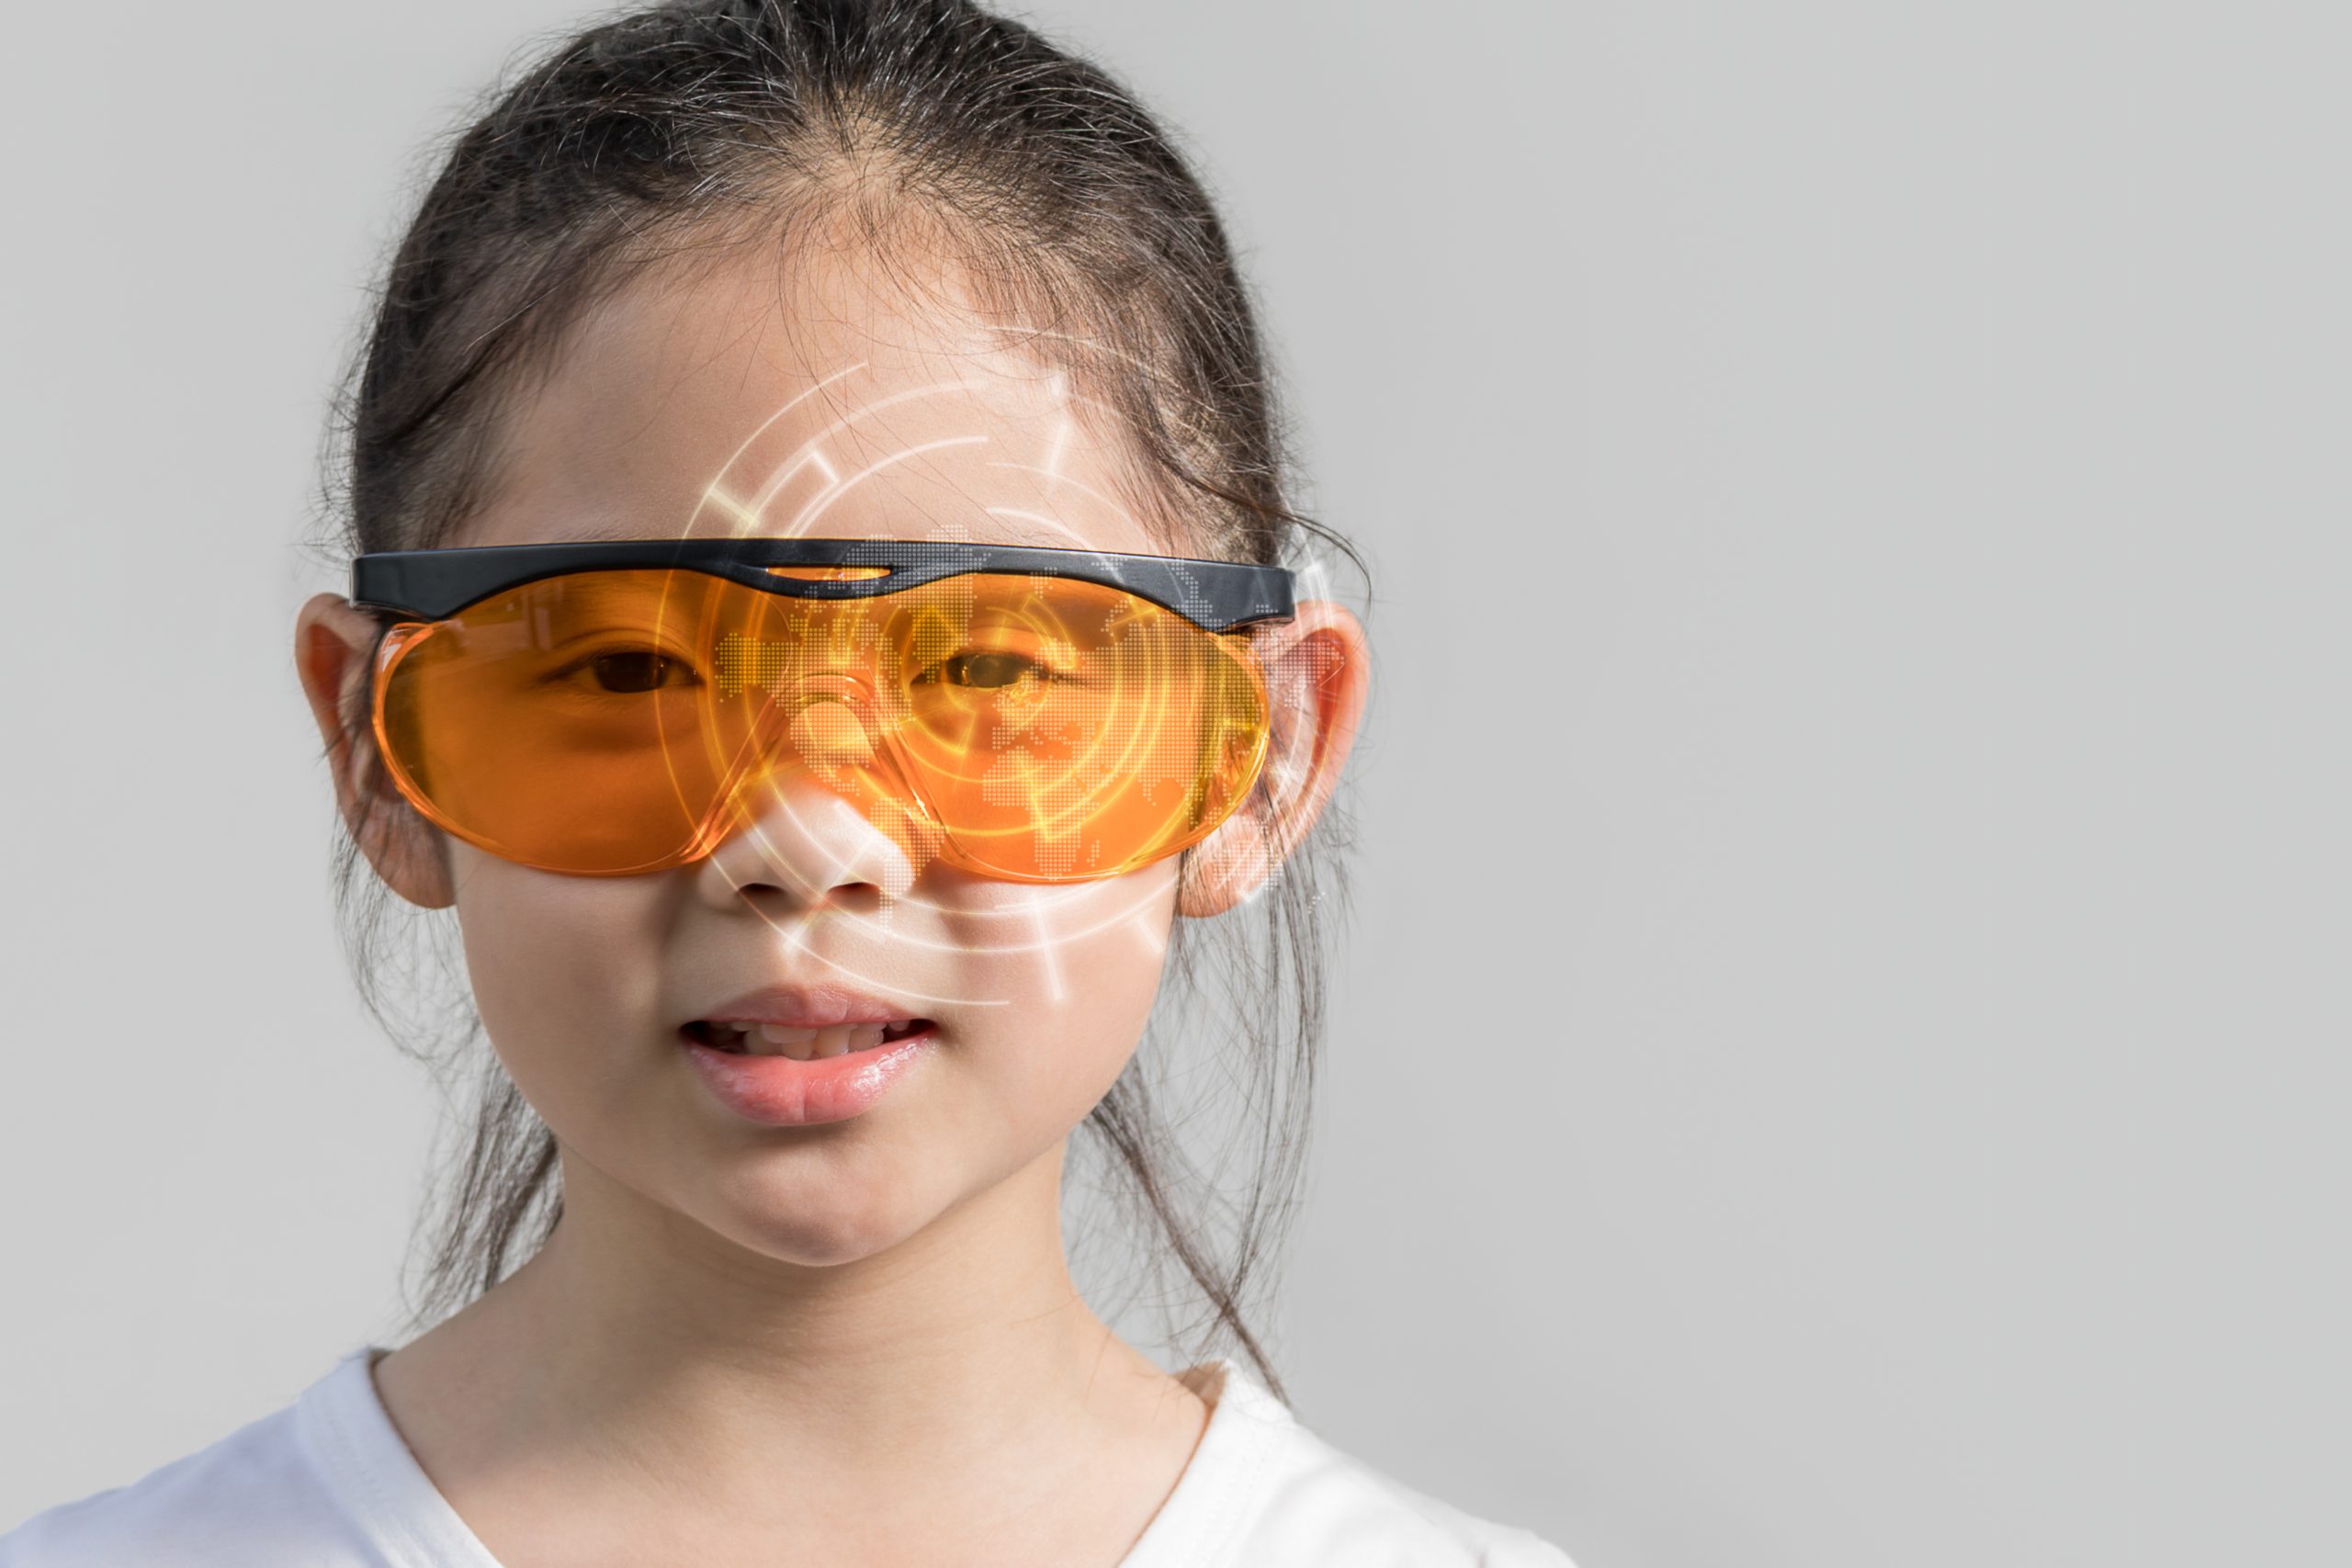 3 Ways Augmented Reality Could Help Prepare Kids For The School Year